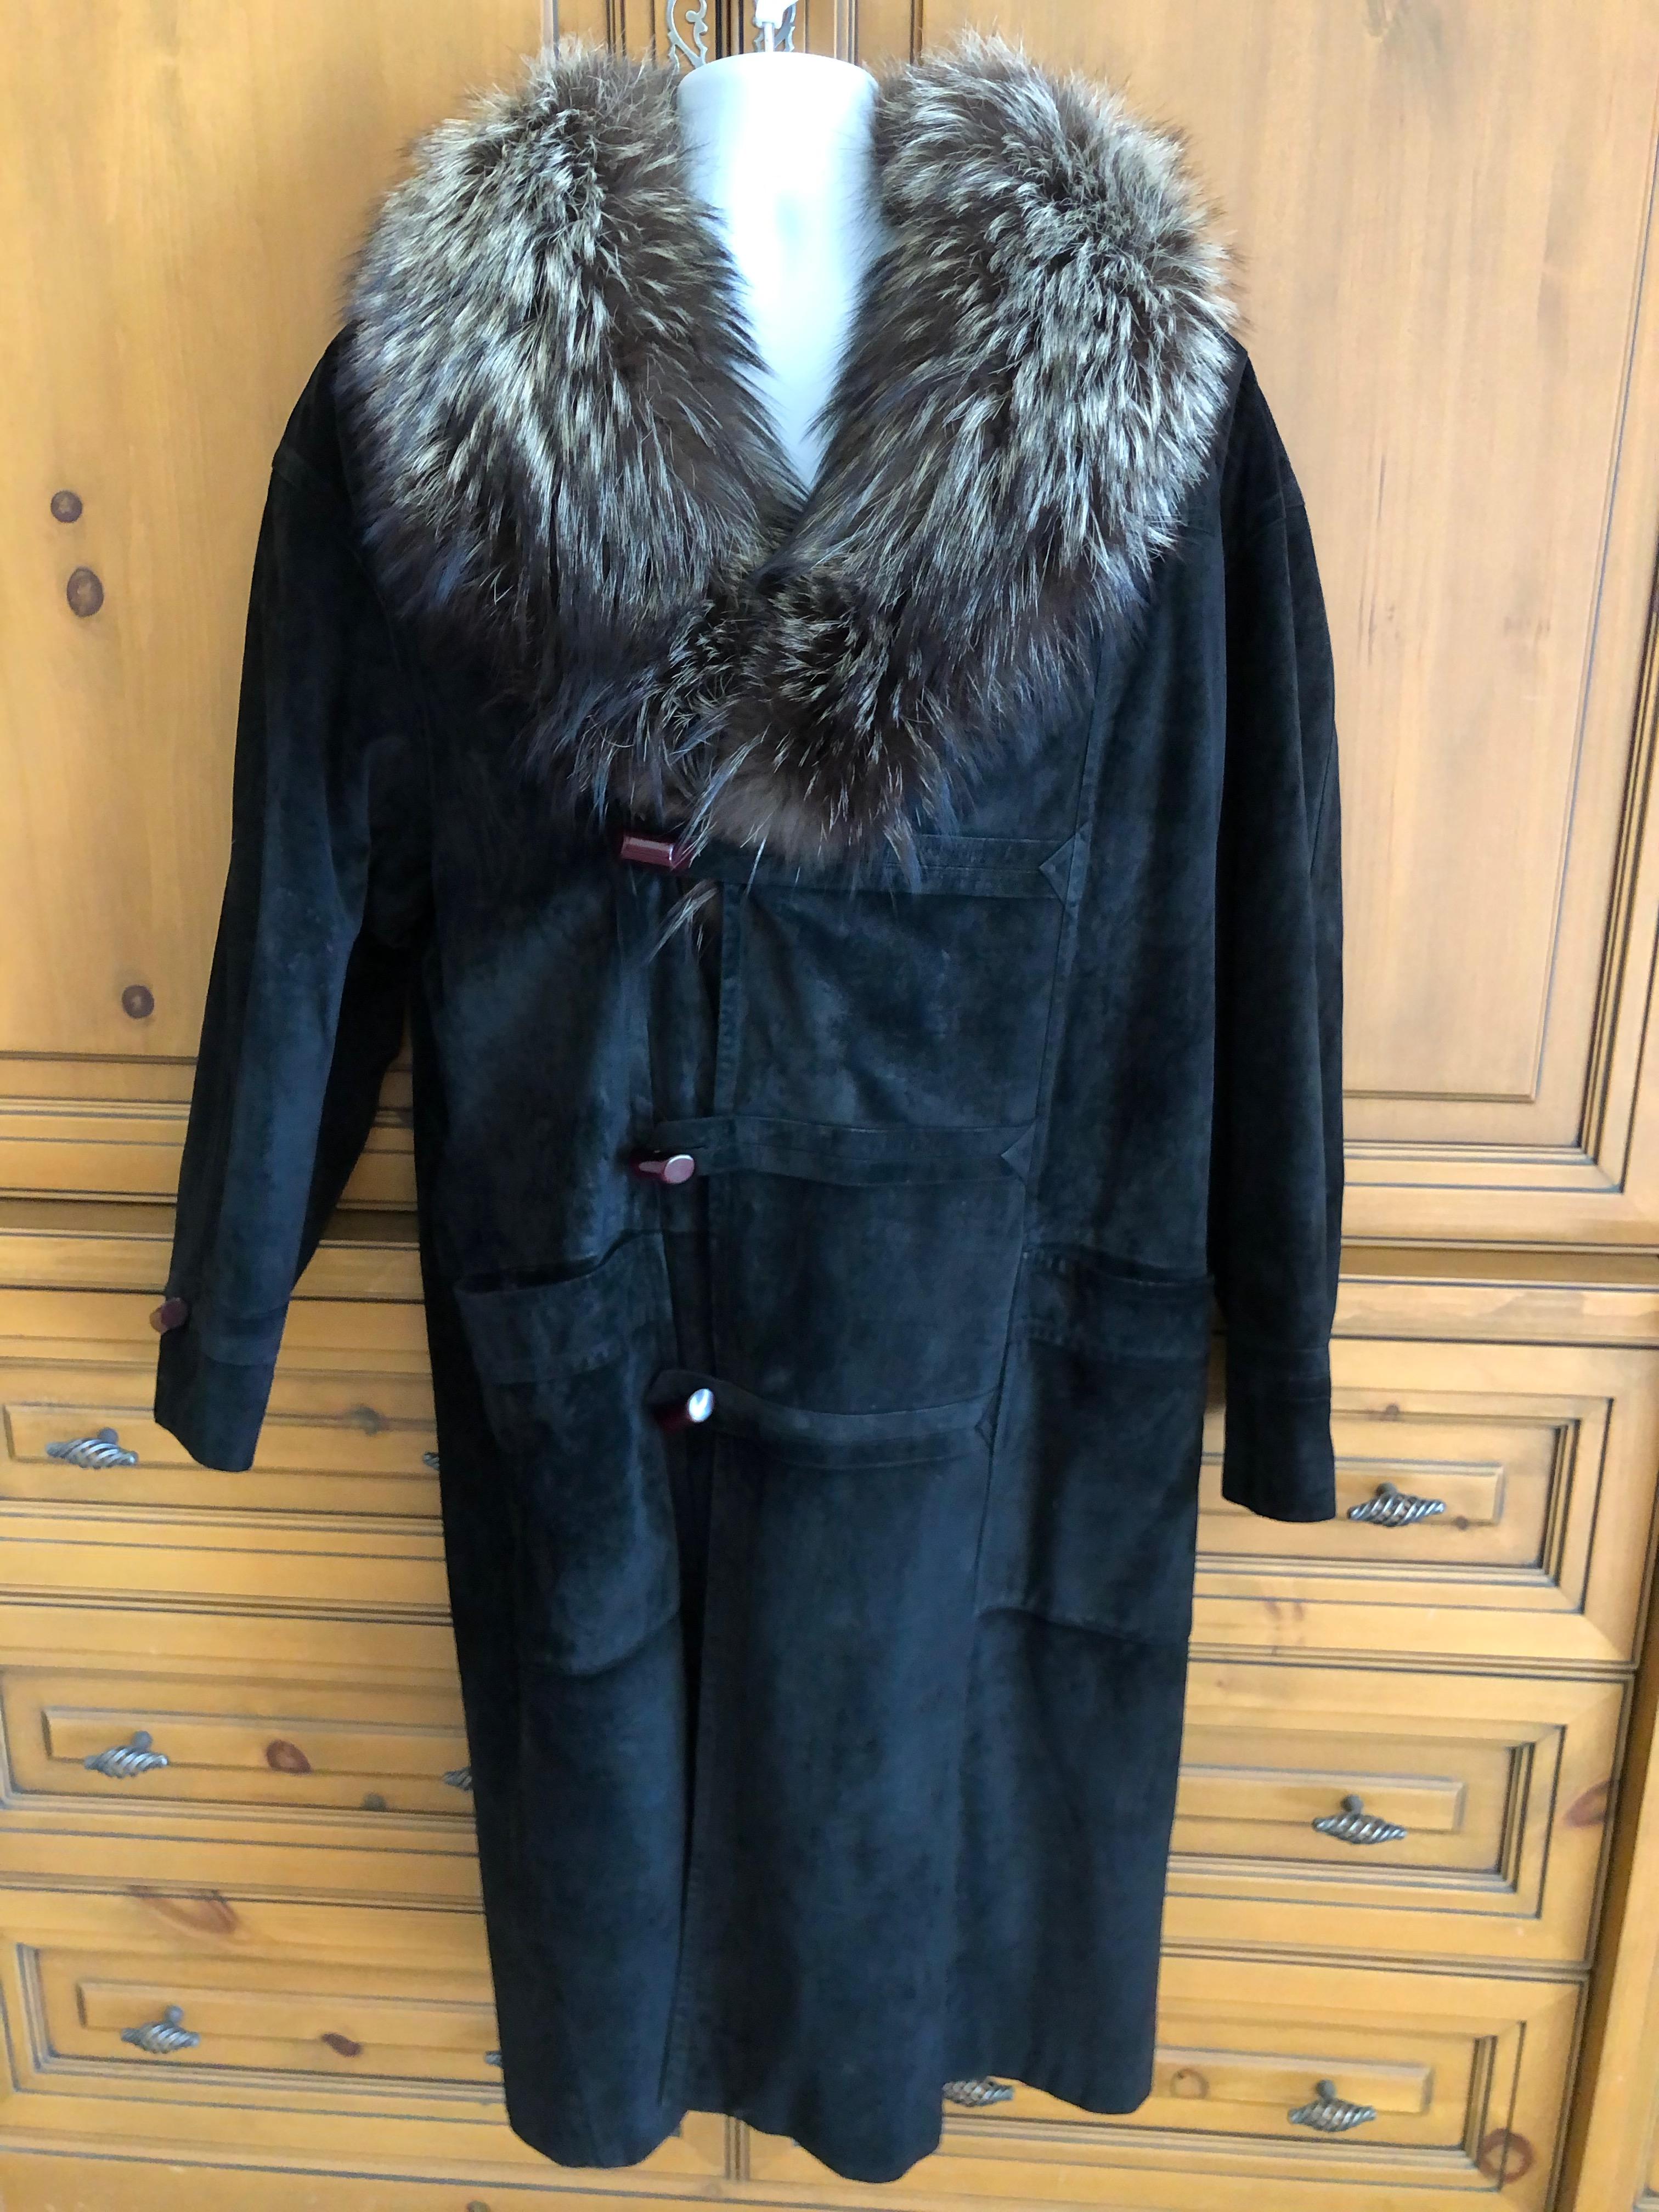 Zilli France Fur Lined Suede Toggle Coat with Wide Fox Collar.
This is so luxurious, fully lined in soft squirrel, with a wide fox collar.
In great pre owned condition, suede doesn't photograph well but it is in really  great condition.
Size